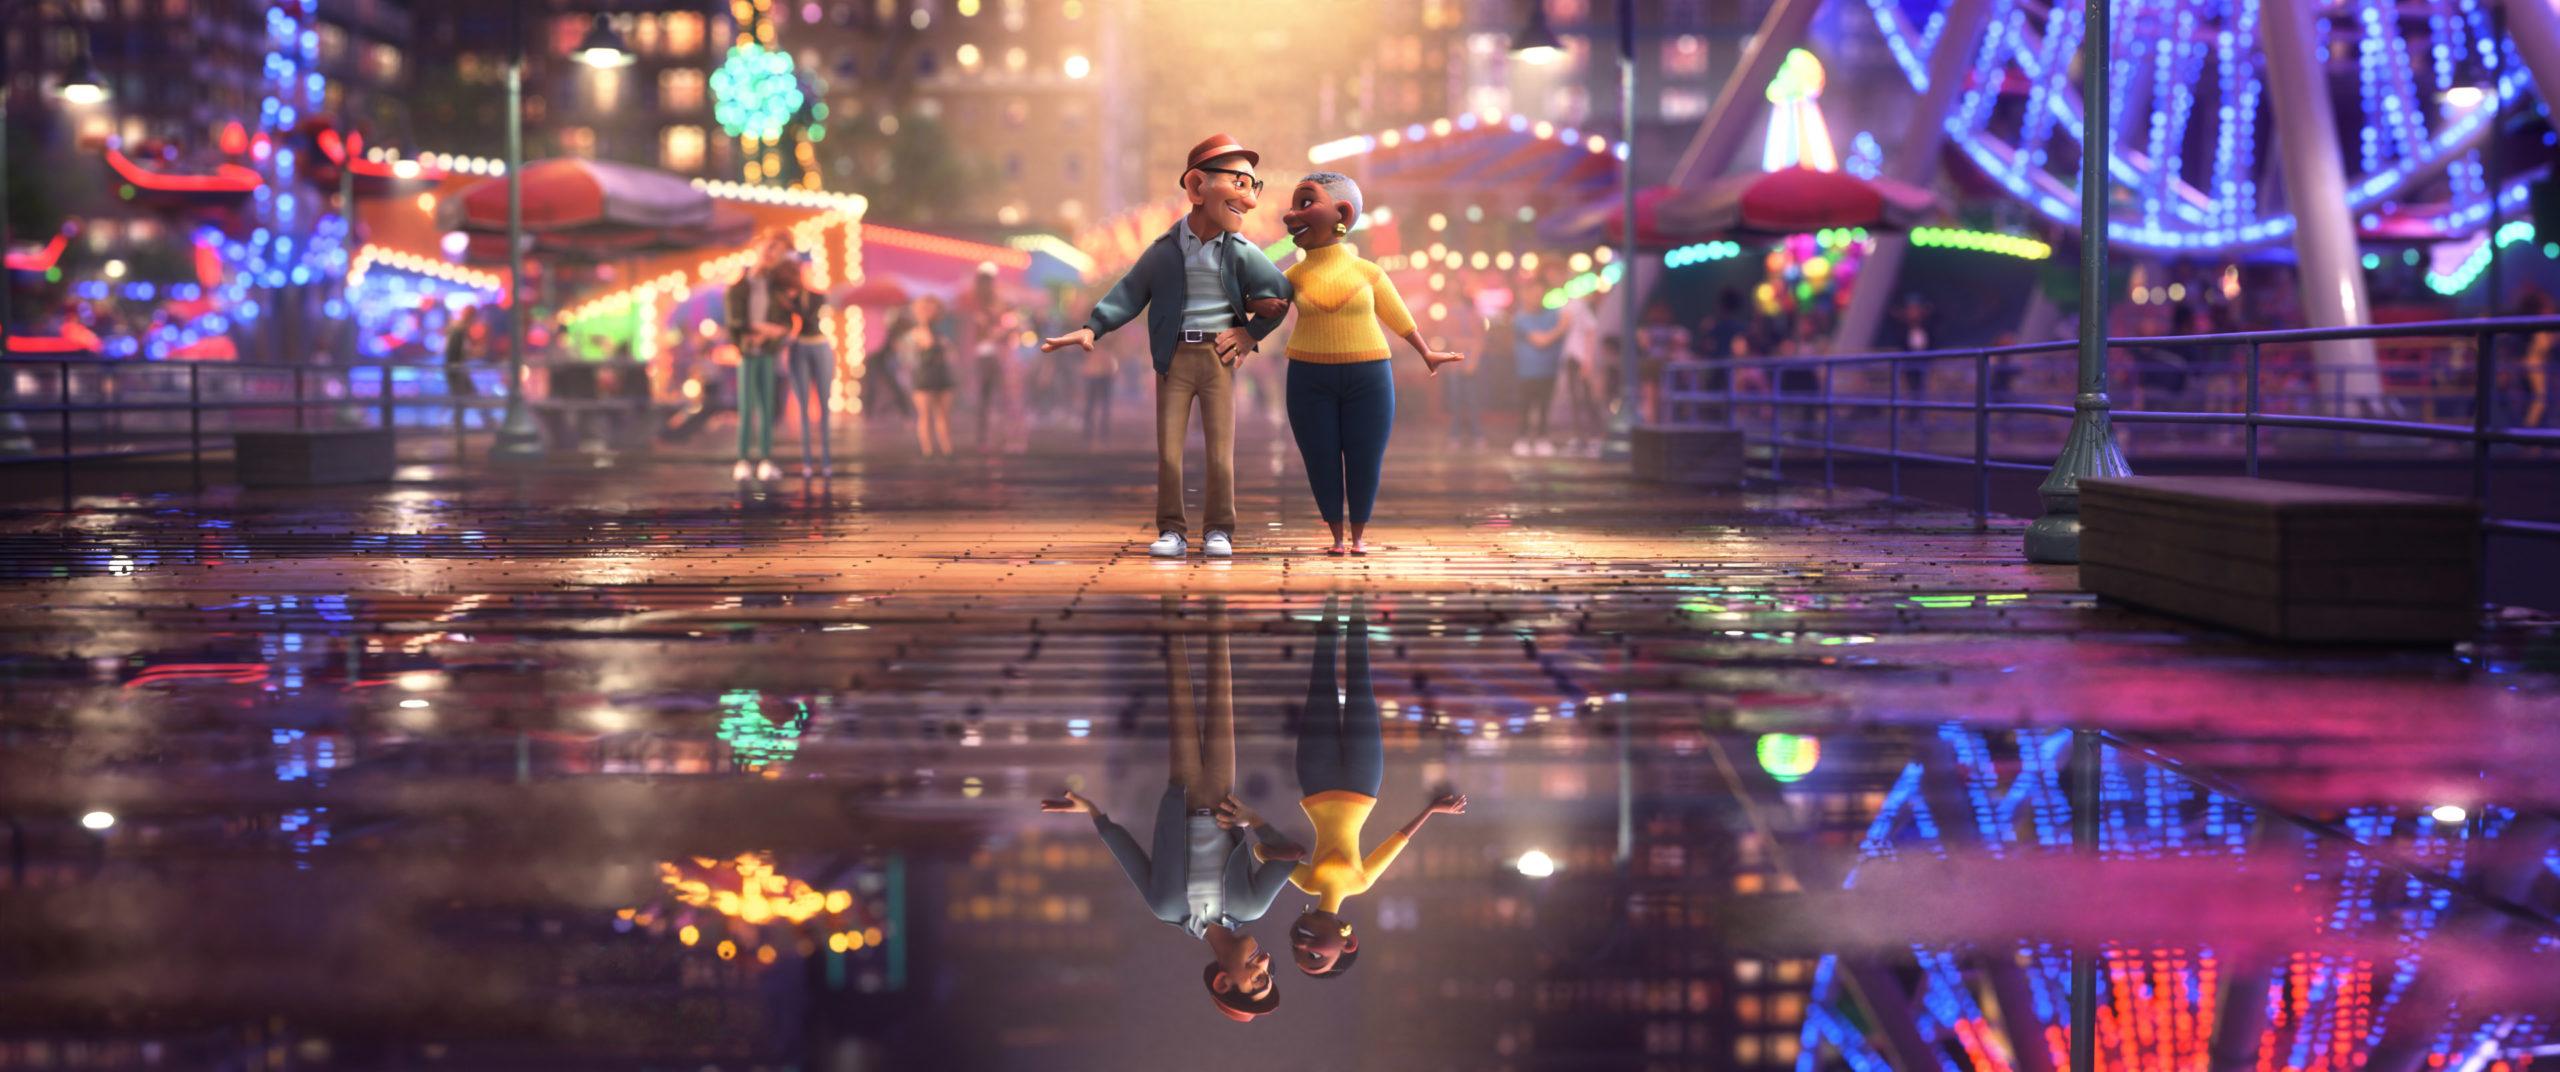 Pinar Toprak & Brad Simonsen On Storytelling Through Music And Dance In Disney’s Us Again [Exclusive Interview]